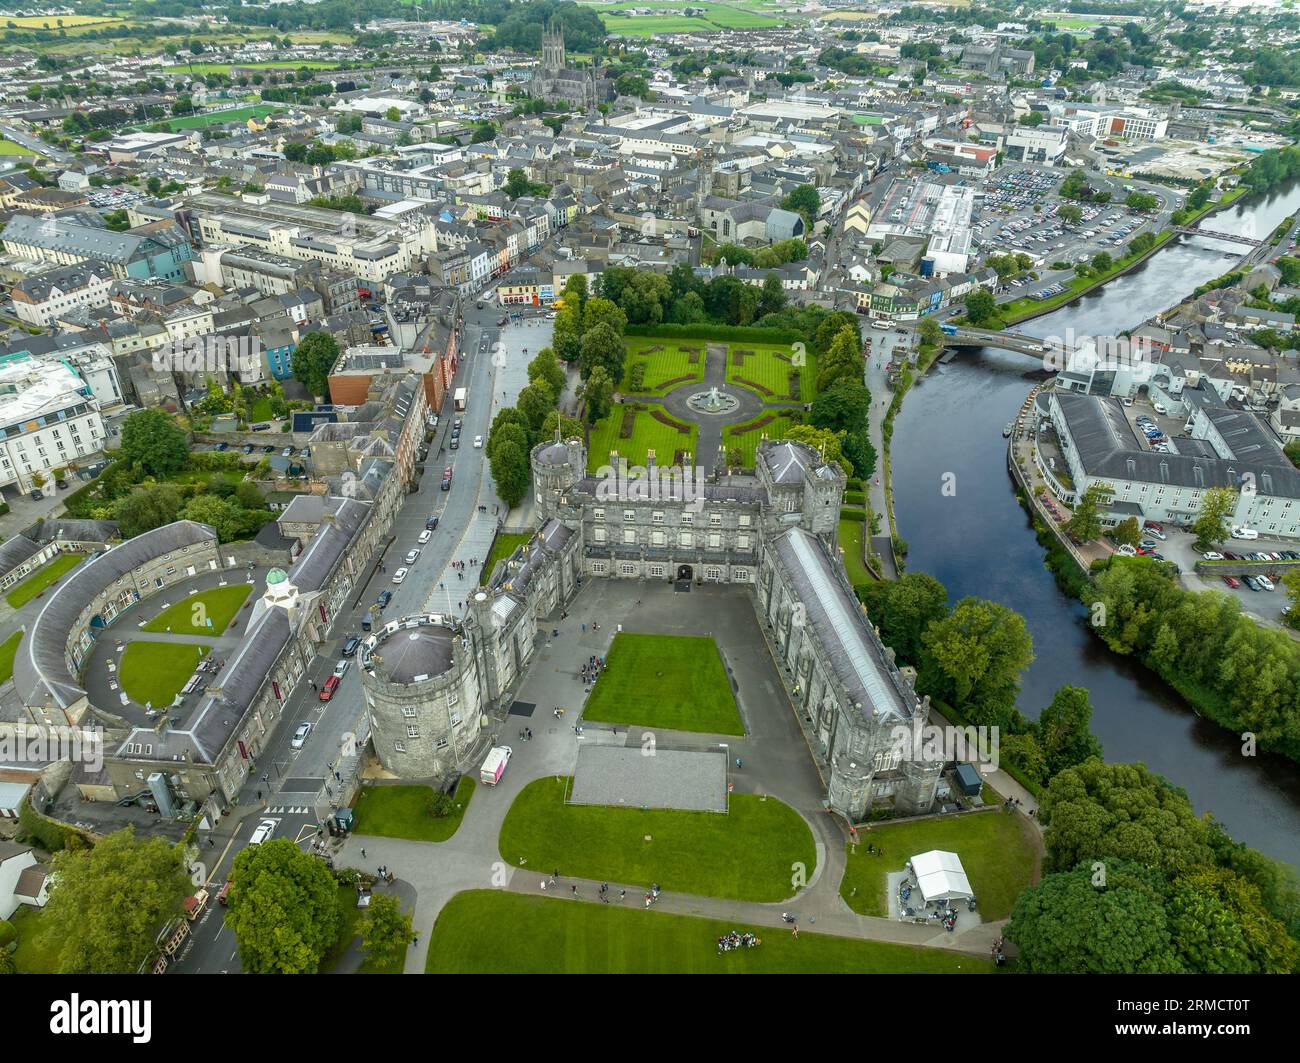 Aerial view of Kilkenny castle, Victorian remodeling of a medieval defensive structure, rolling parkland, terraced rose garden, woodlands, man-made la Stock Photo